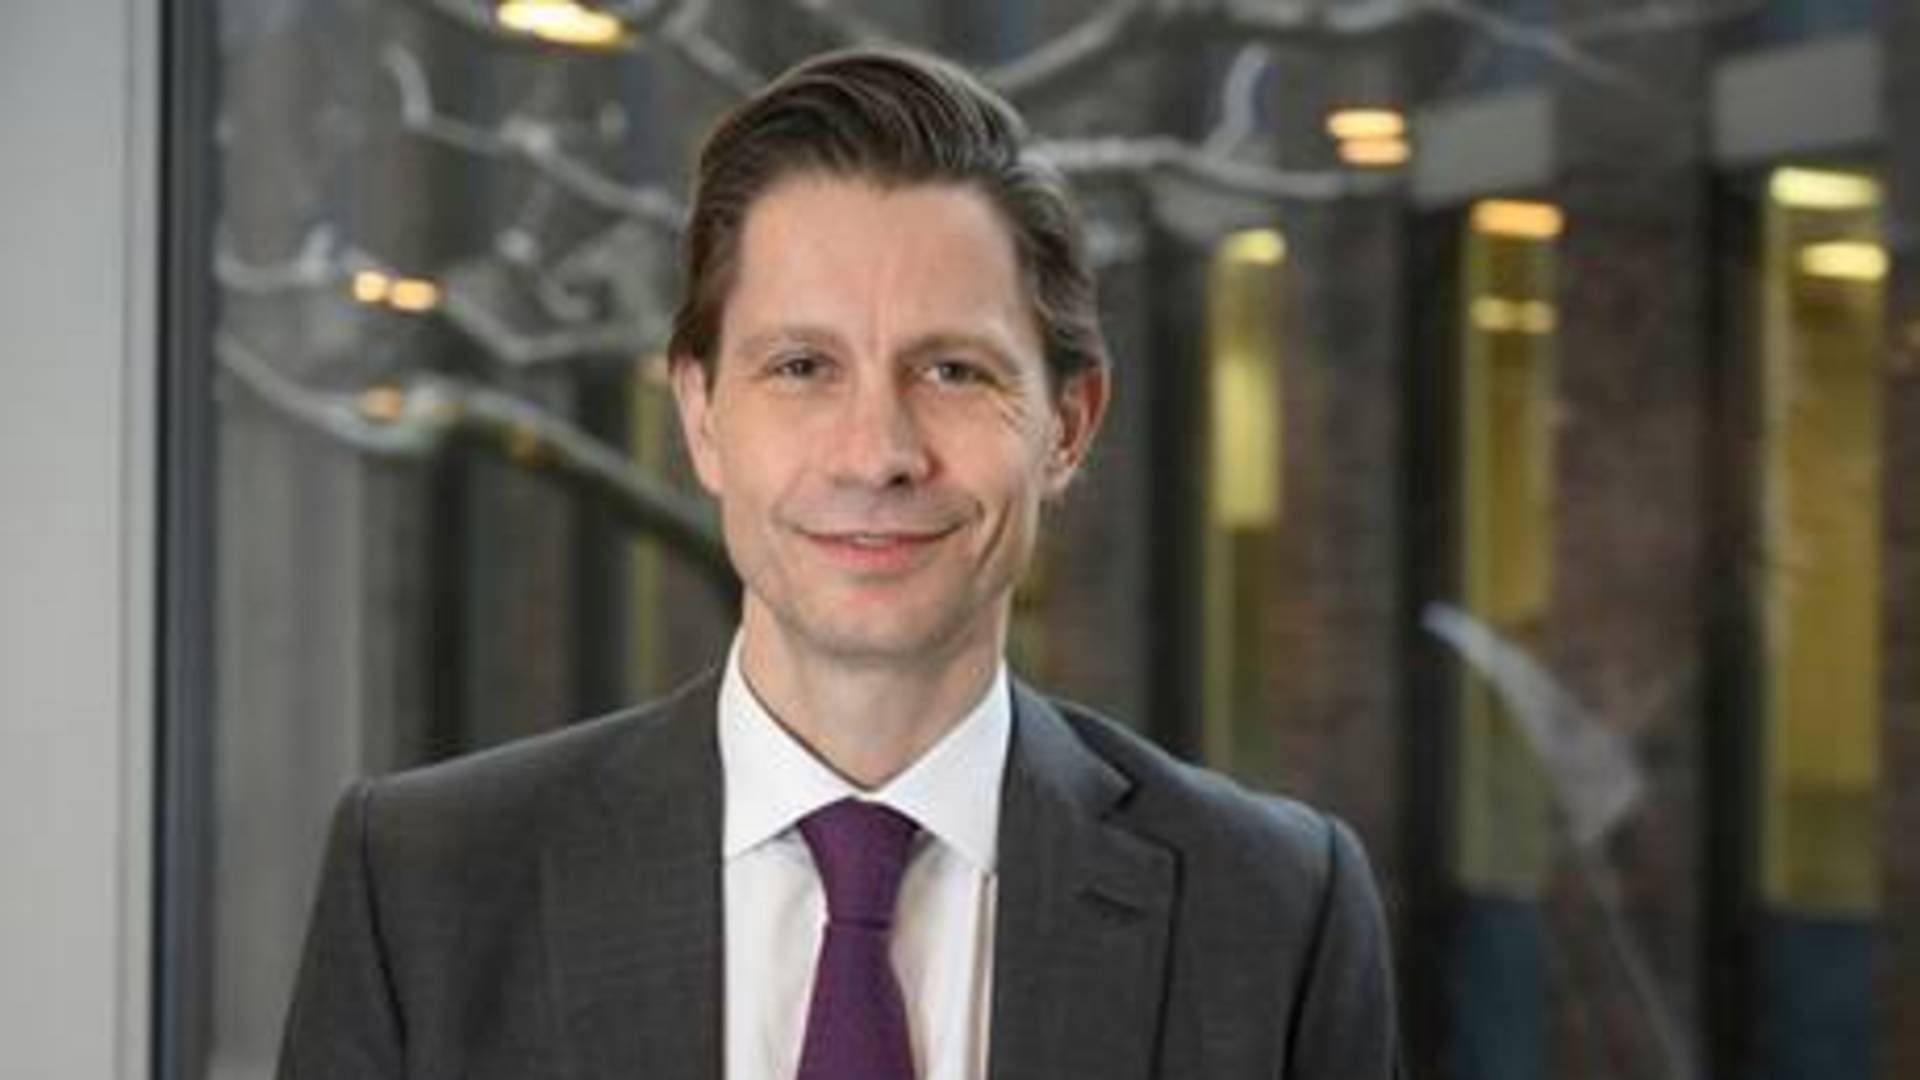 Christian Heiberg participates in two of this year's top ten most-read articles. In late January 2021, he will become Head of Danske Bank Asset Management. | Photo: Danske Bank/PR